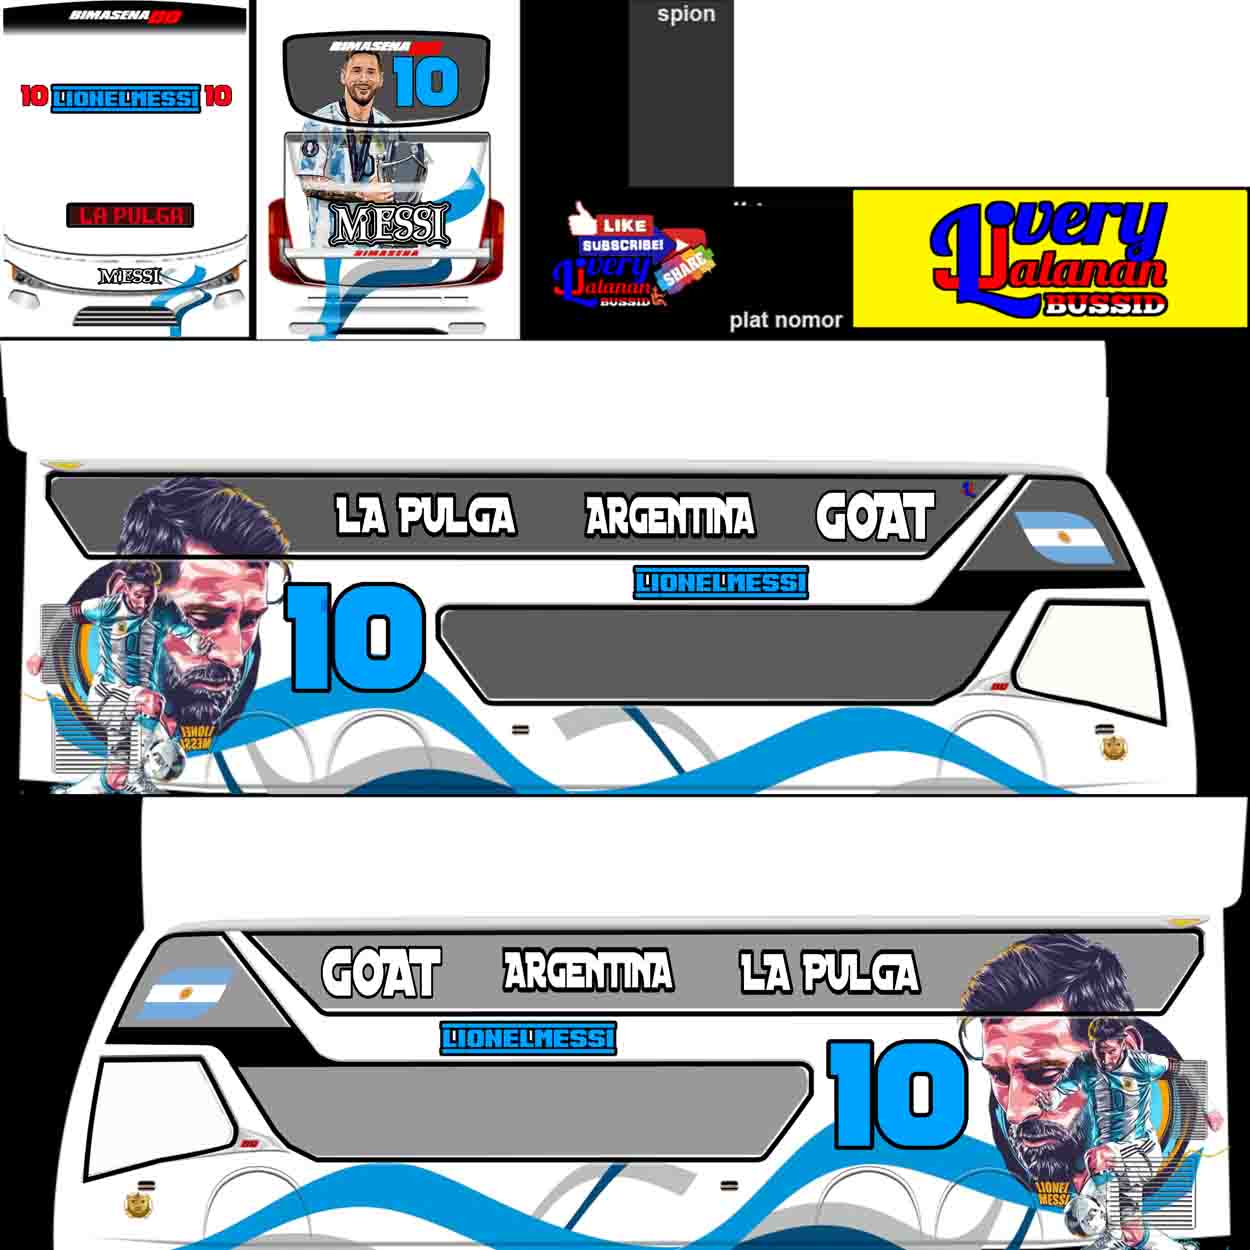 template bussid messi